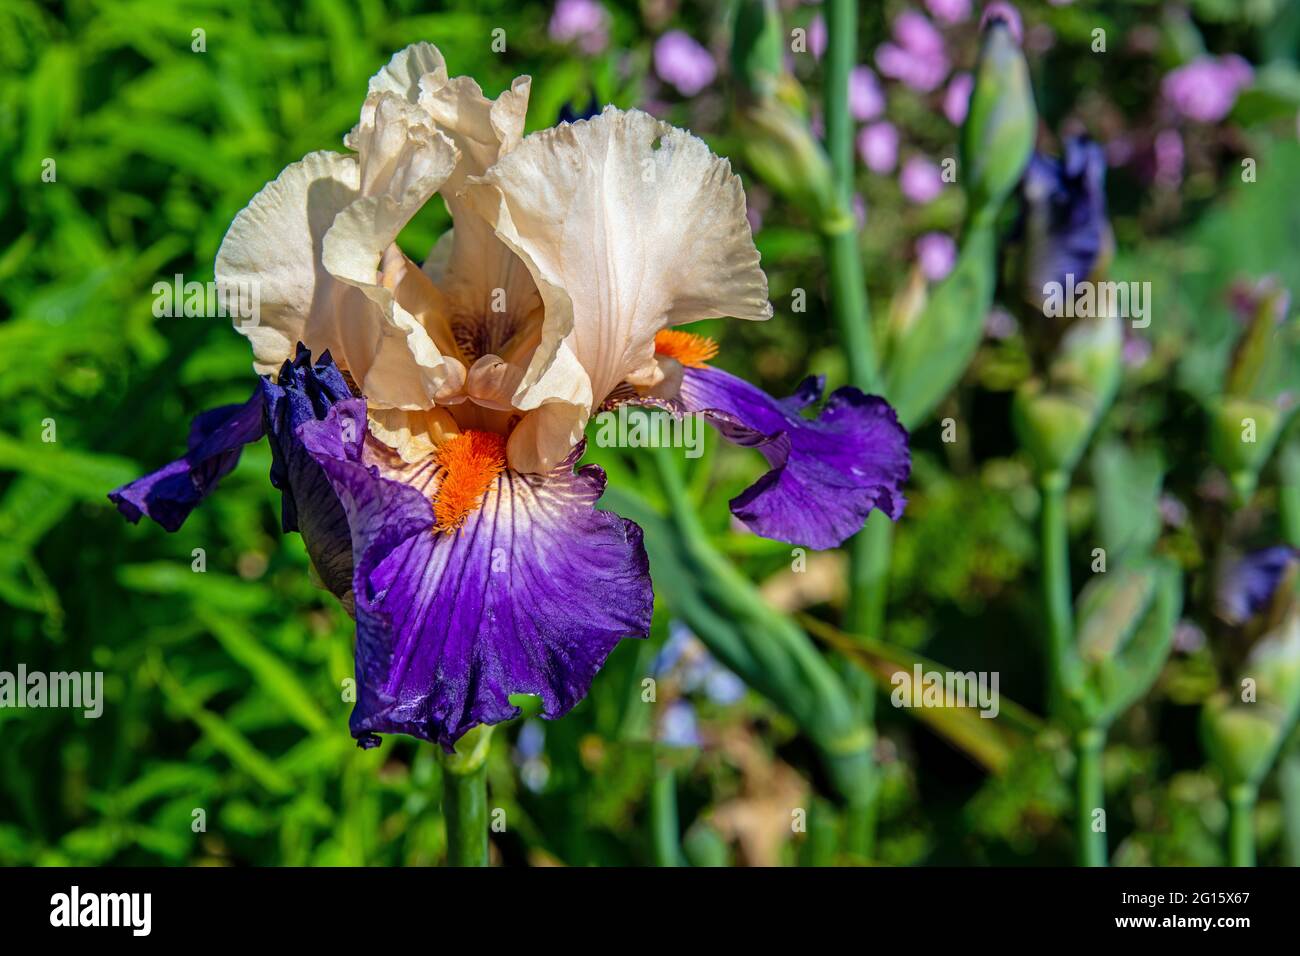 Iris flower head with many colors in beige, magenta and orange Stock Photo